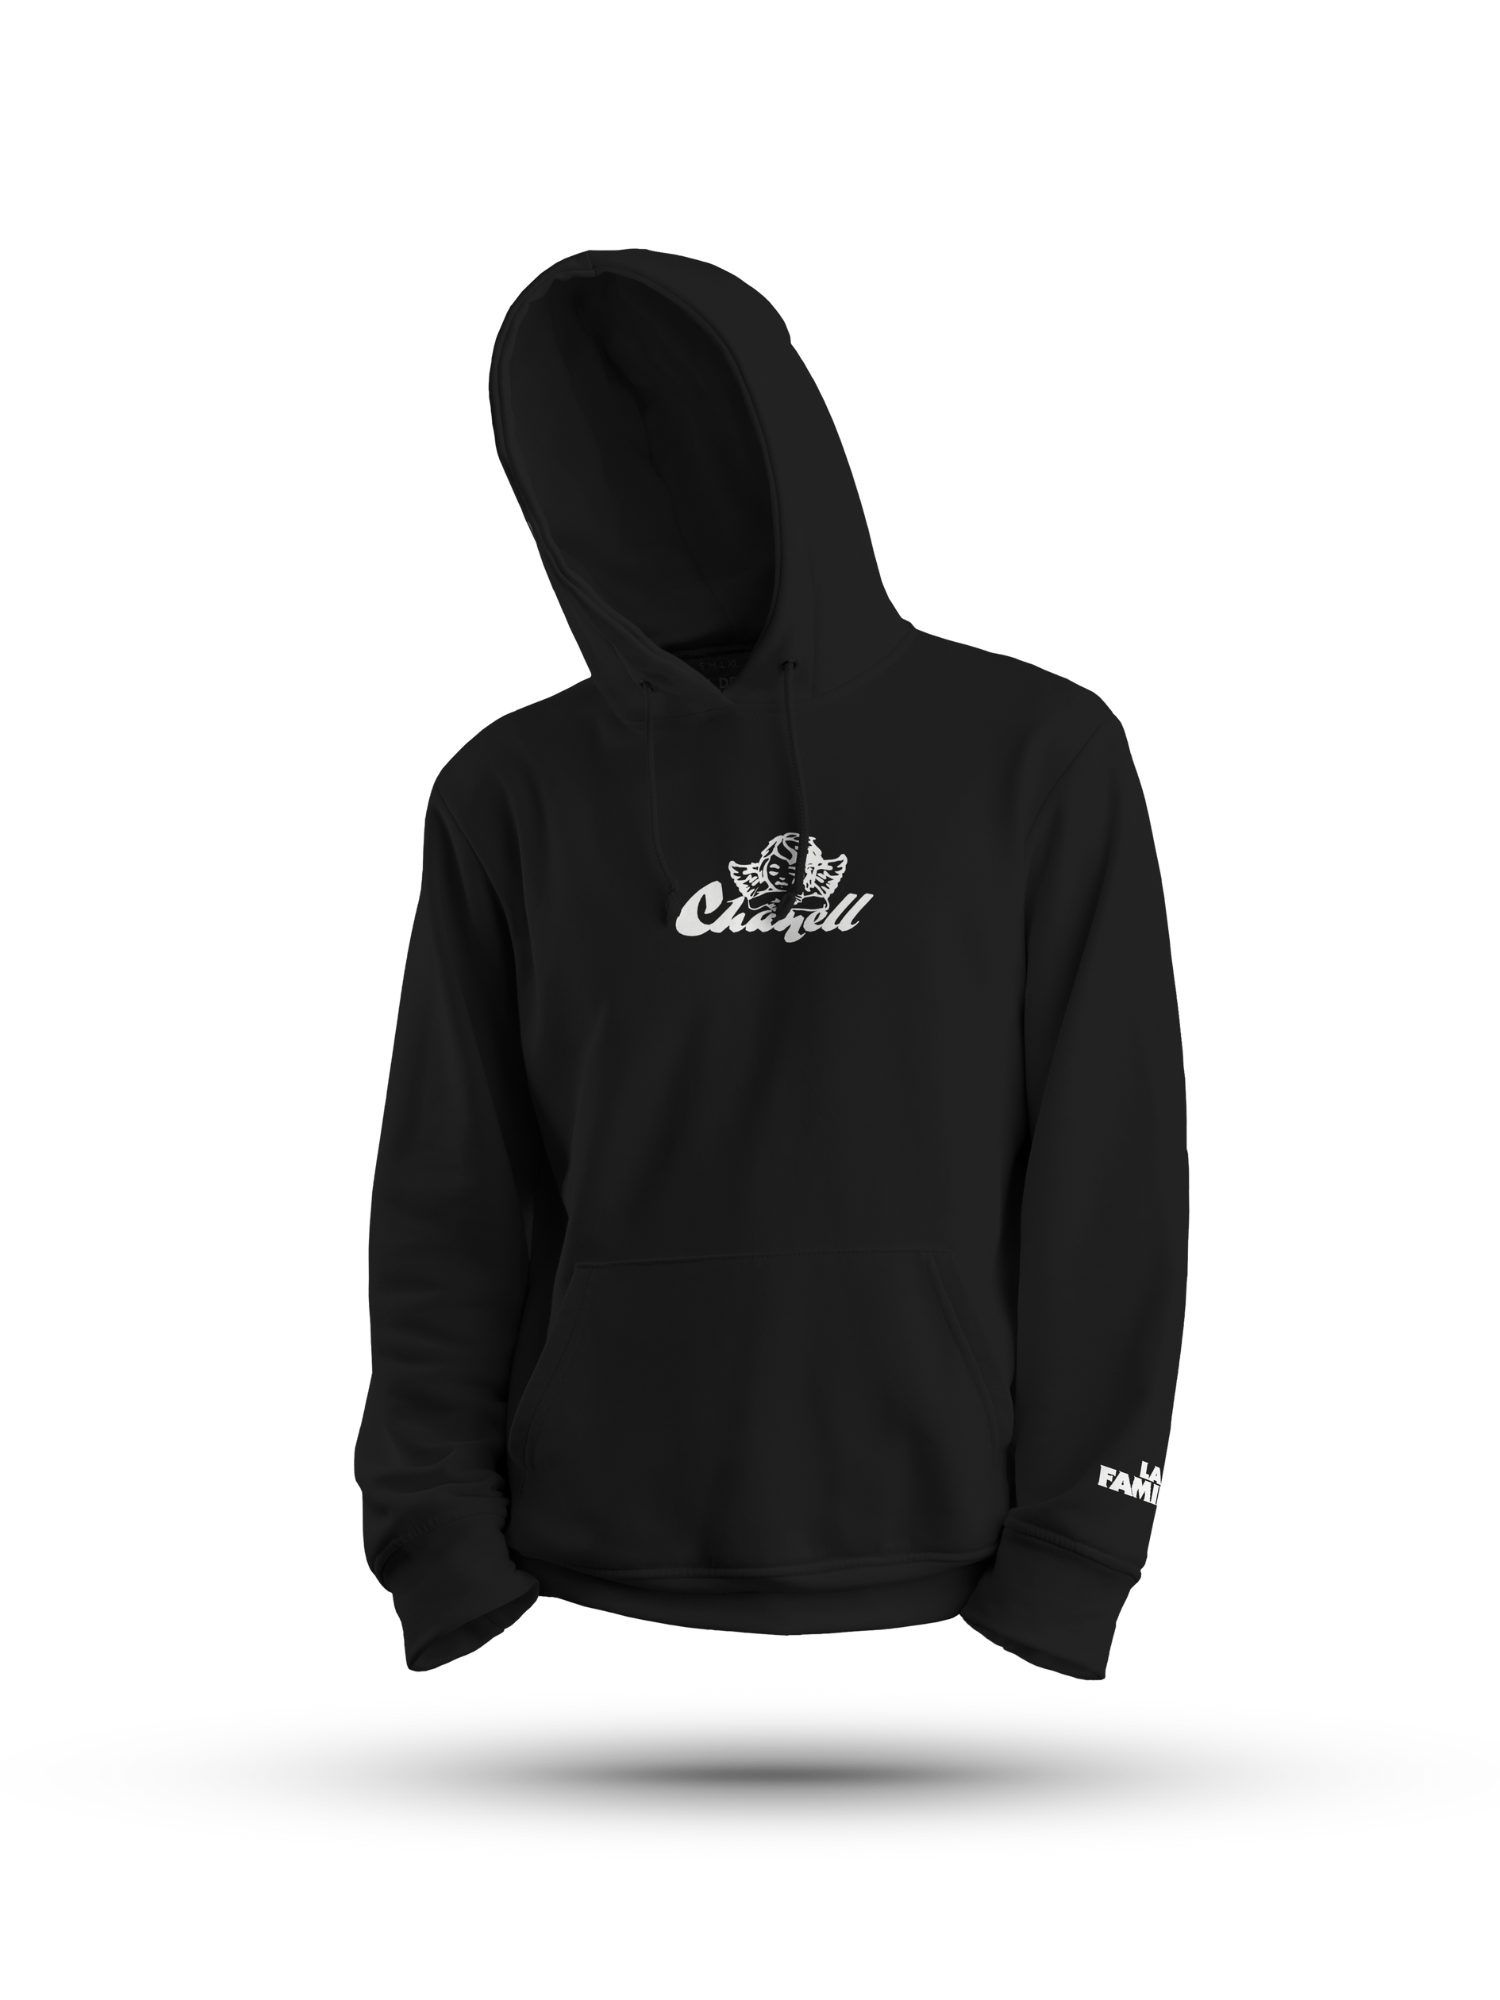 Chanell Hoodie Black